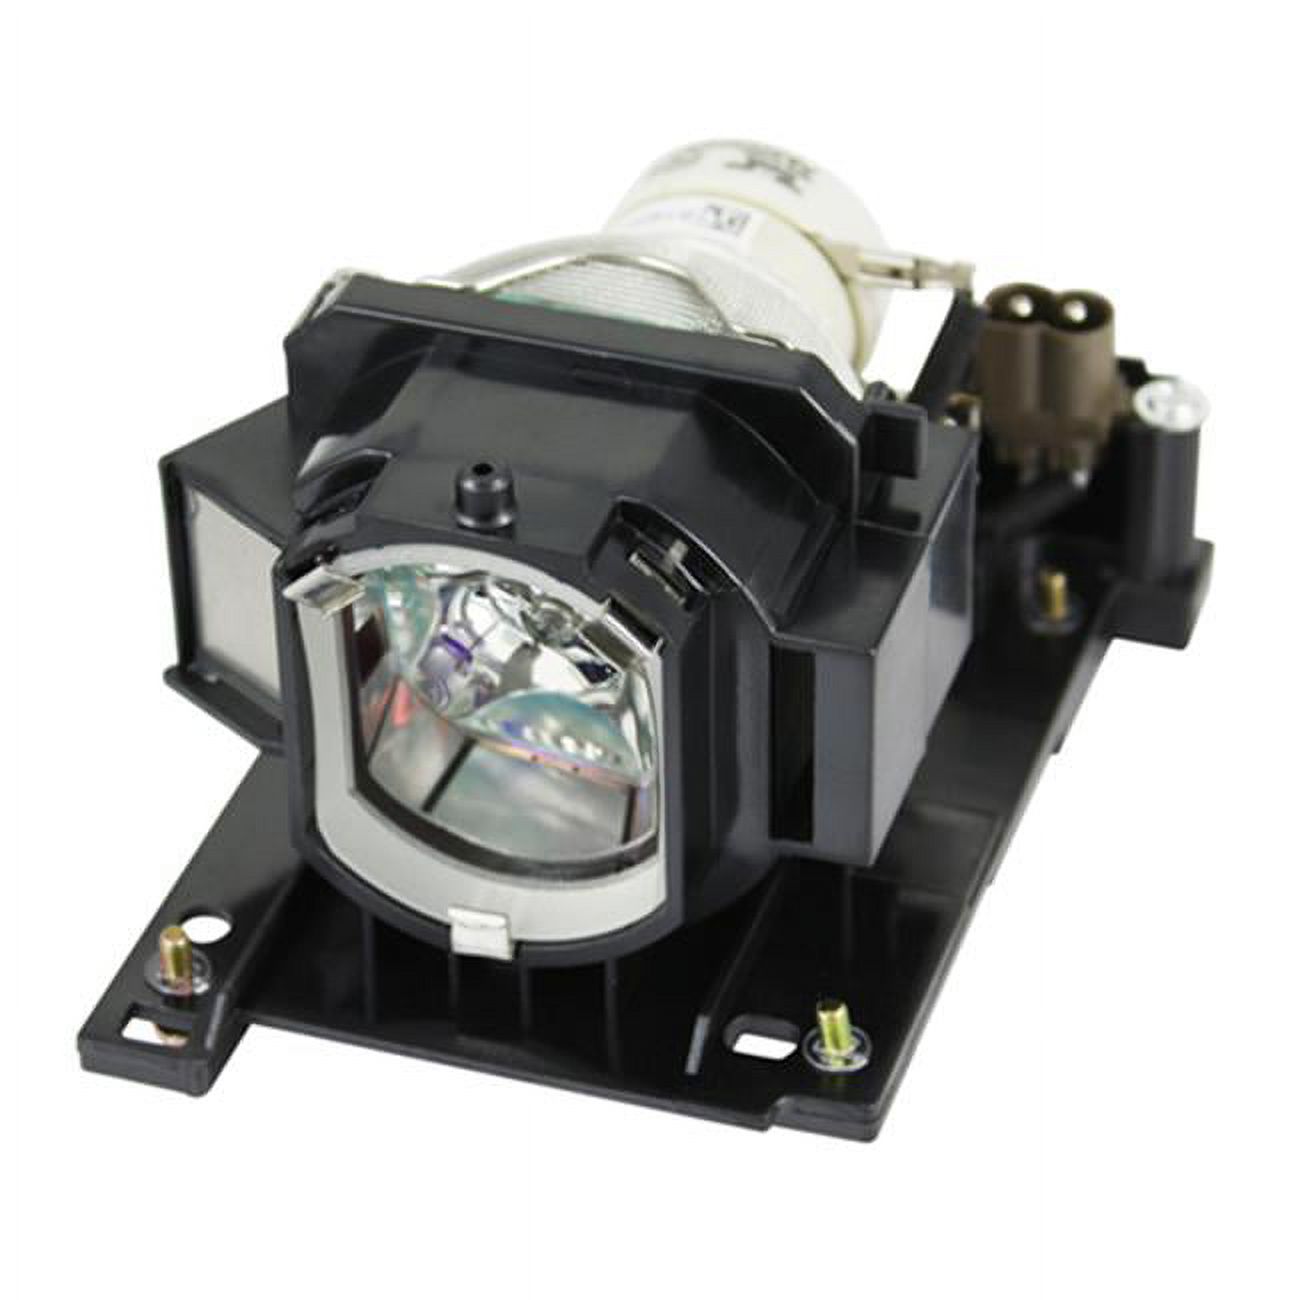 210 Watts Replacement Lamp for 3M 78-6972-0008-3 with Housing - image 1 of 1